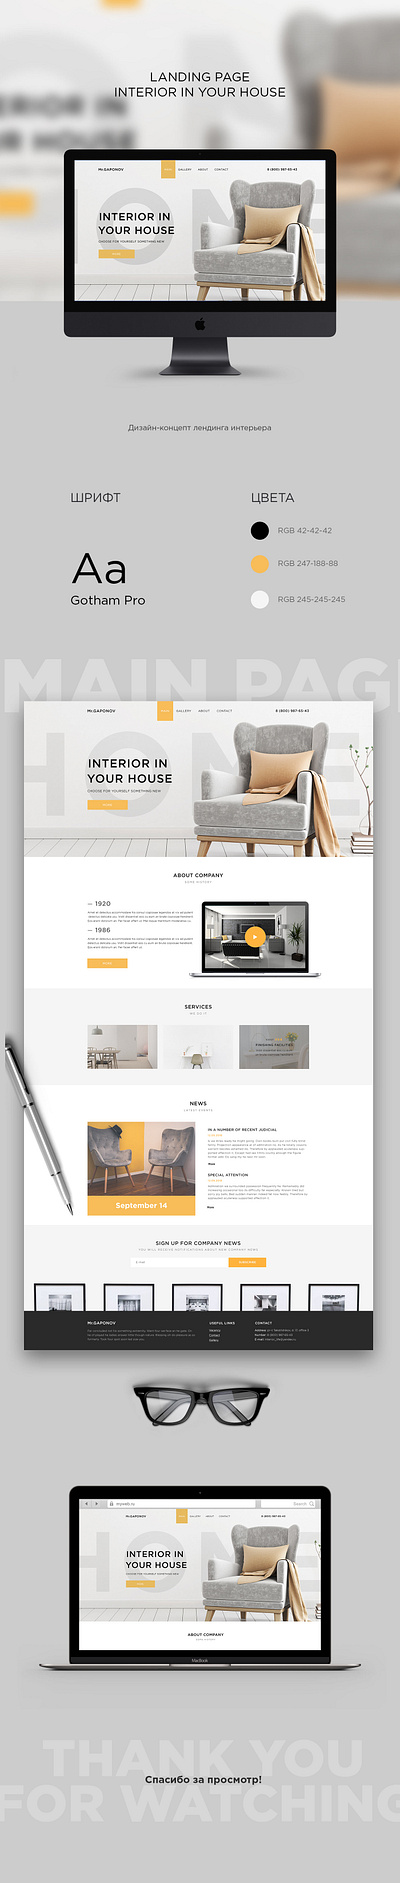 Landing Page Interior In Your Home javascript